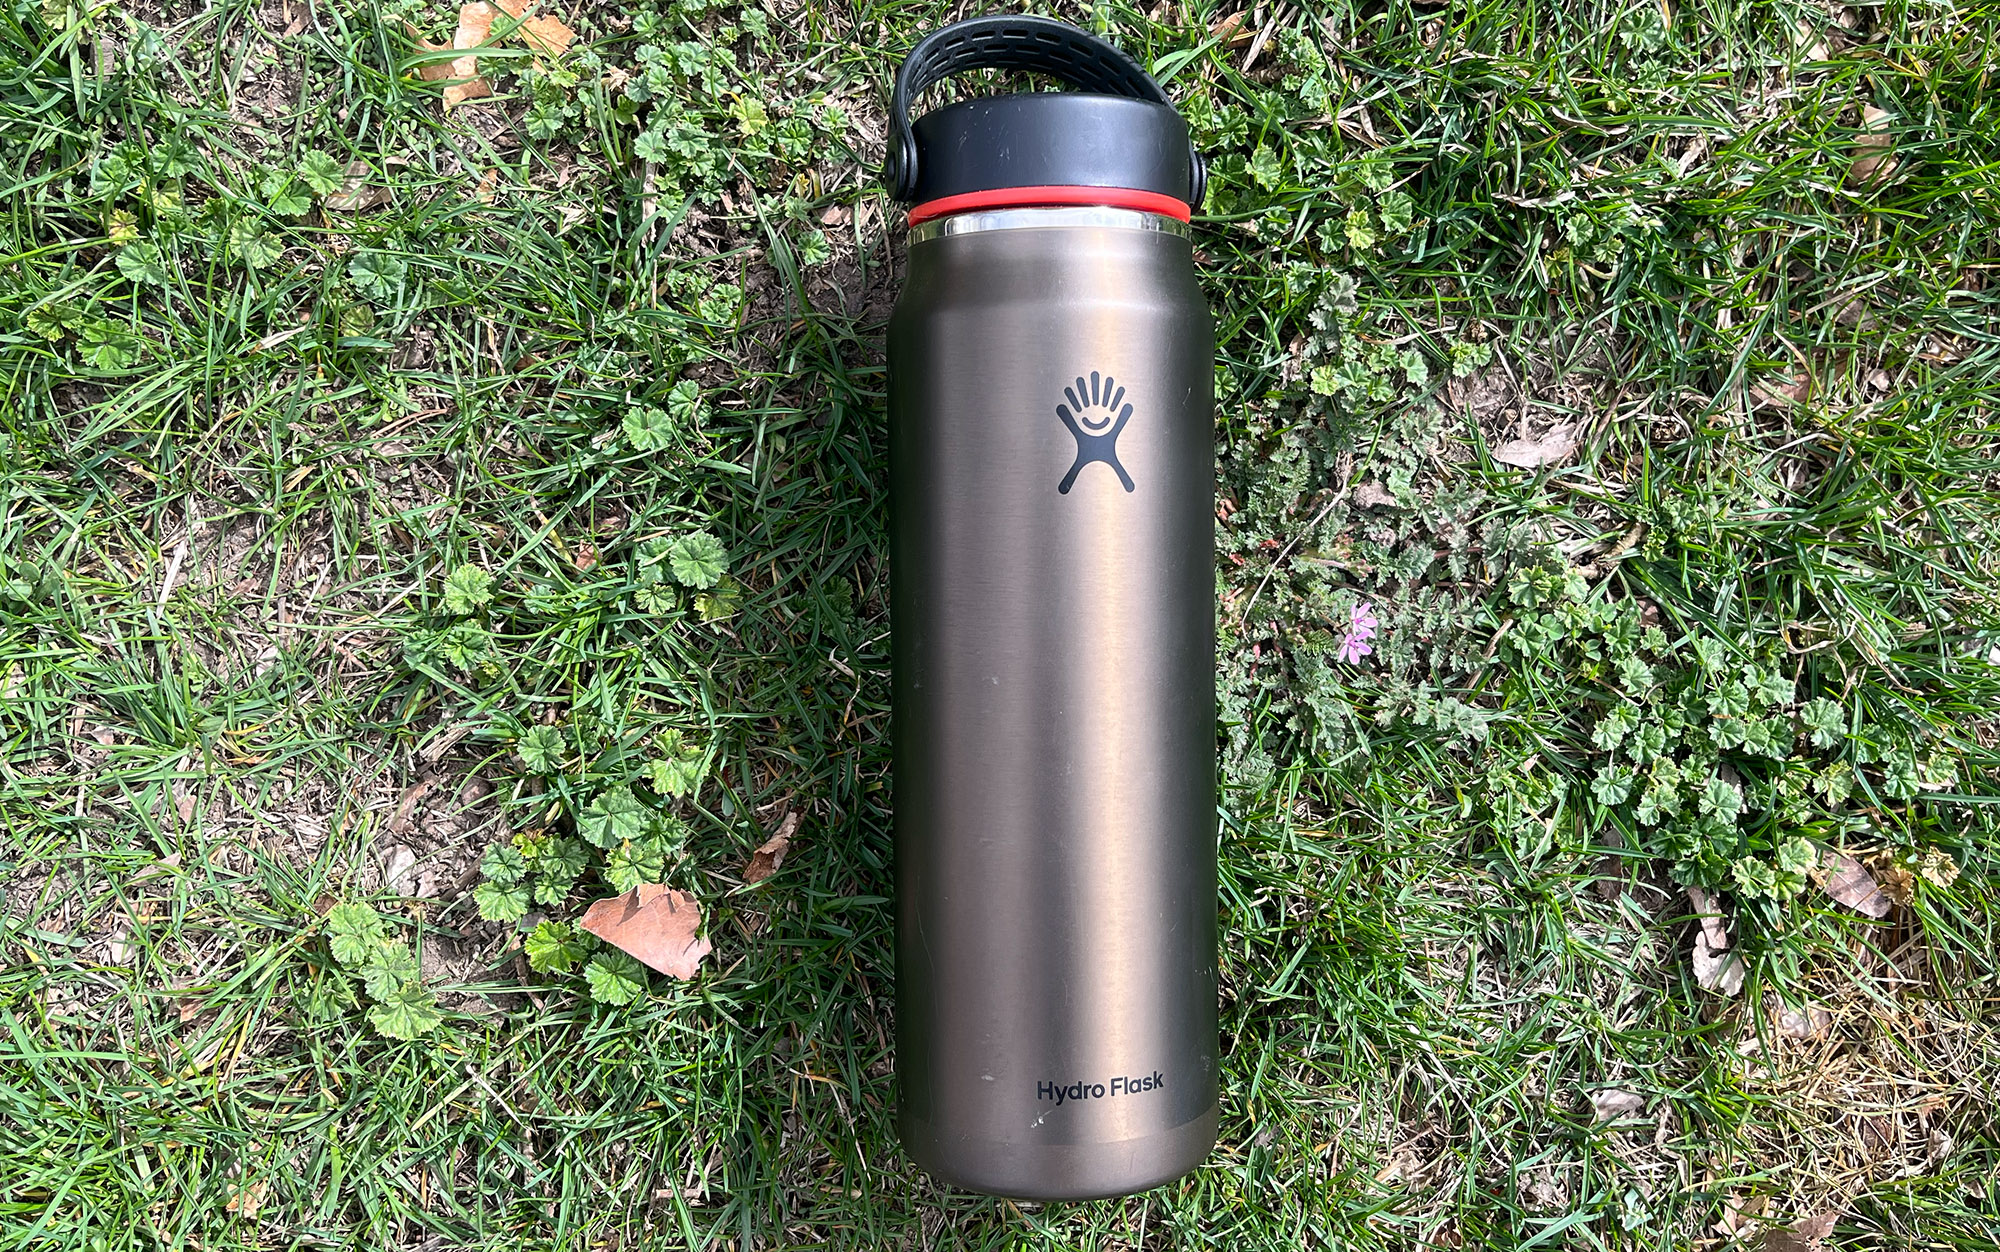 We tested the HydroFlask Trail Series.